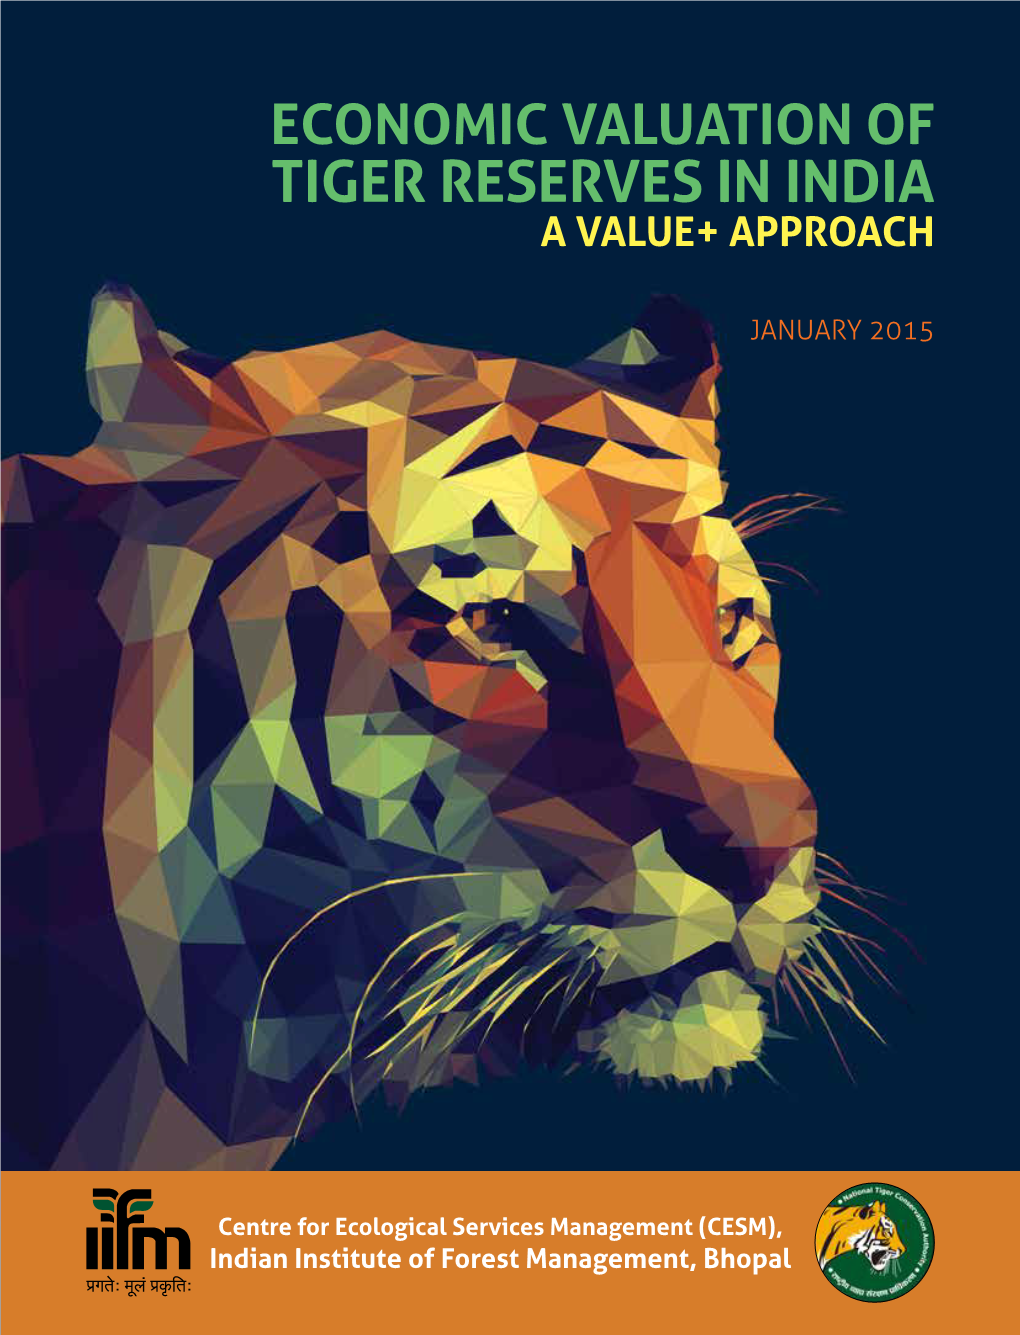 Economic Valuation of Tiger Reserves in India a Value+ Approach